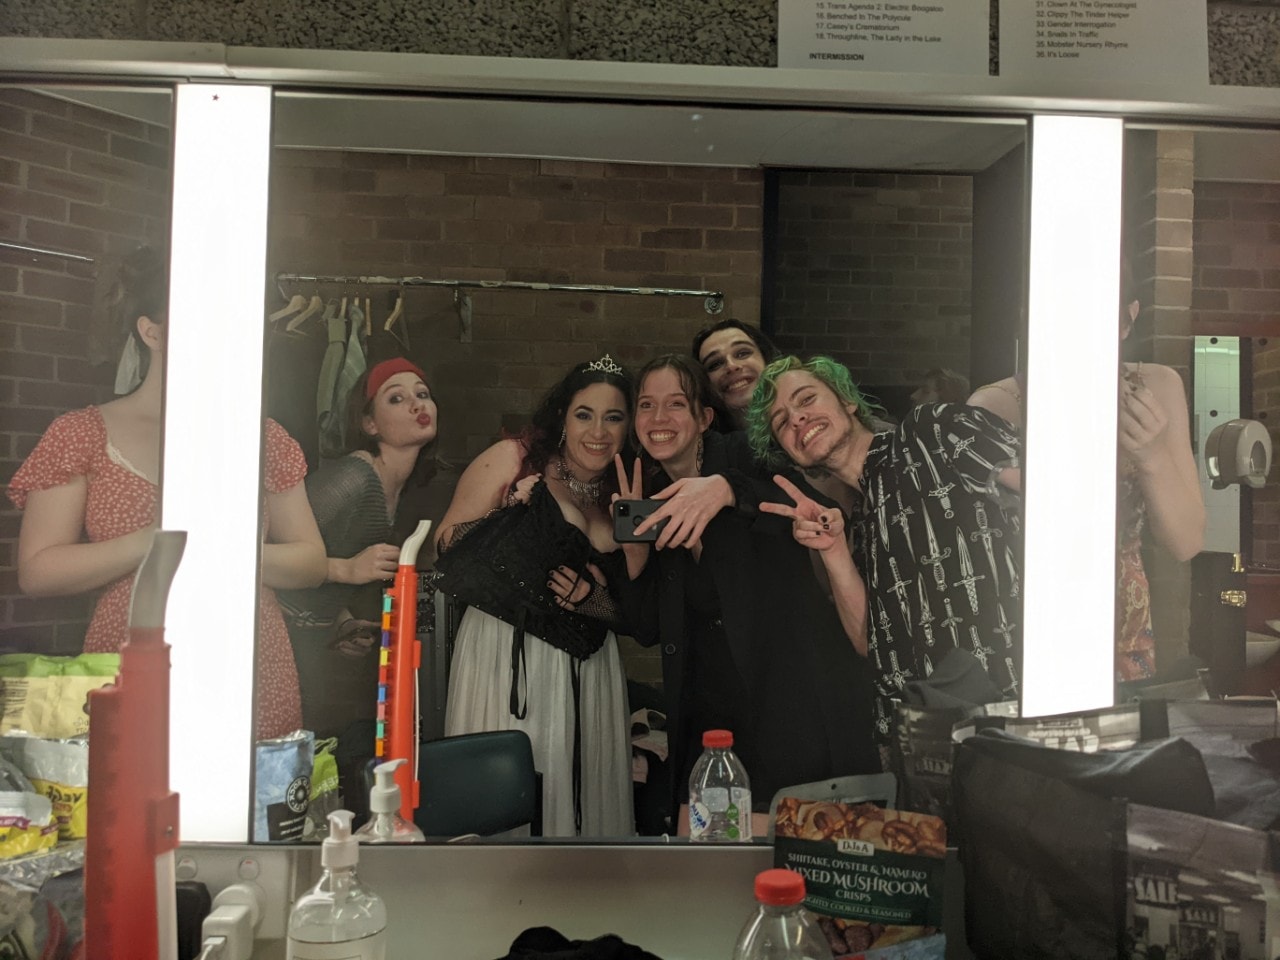 A group of performers smiling into a mirror backstage at a theatre